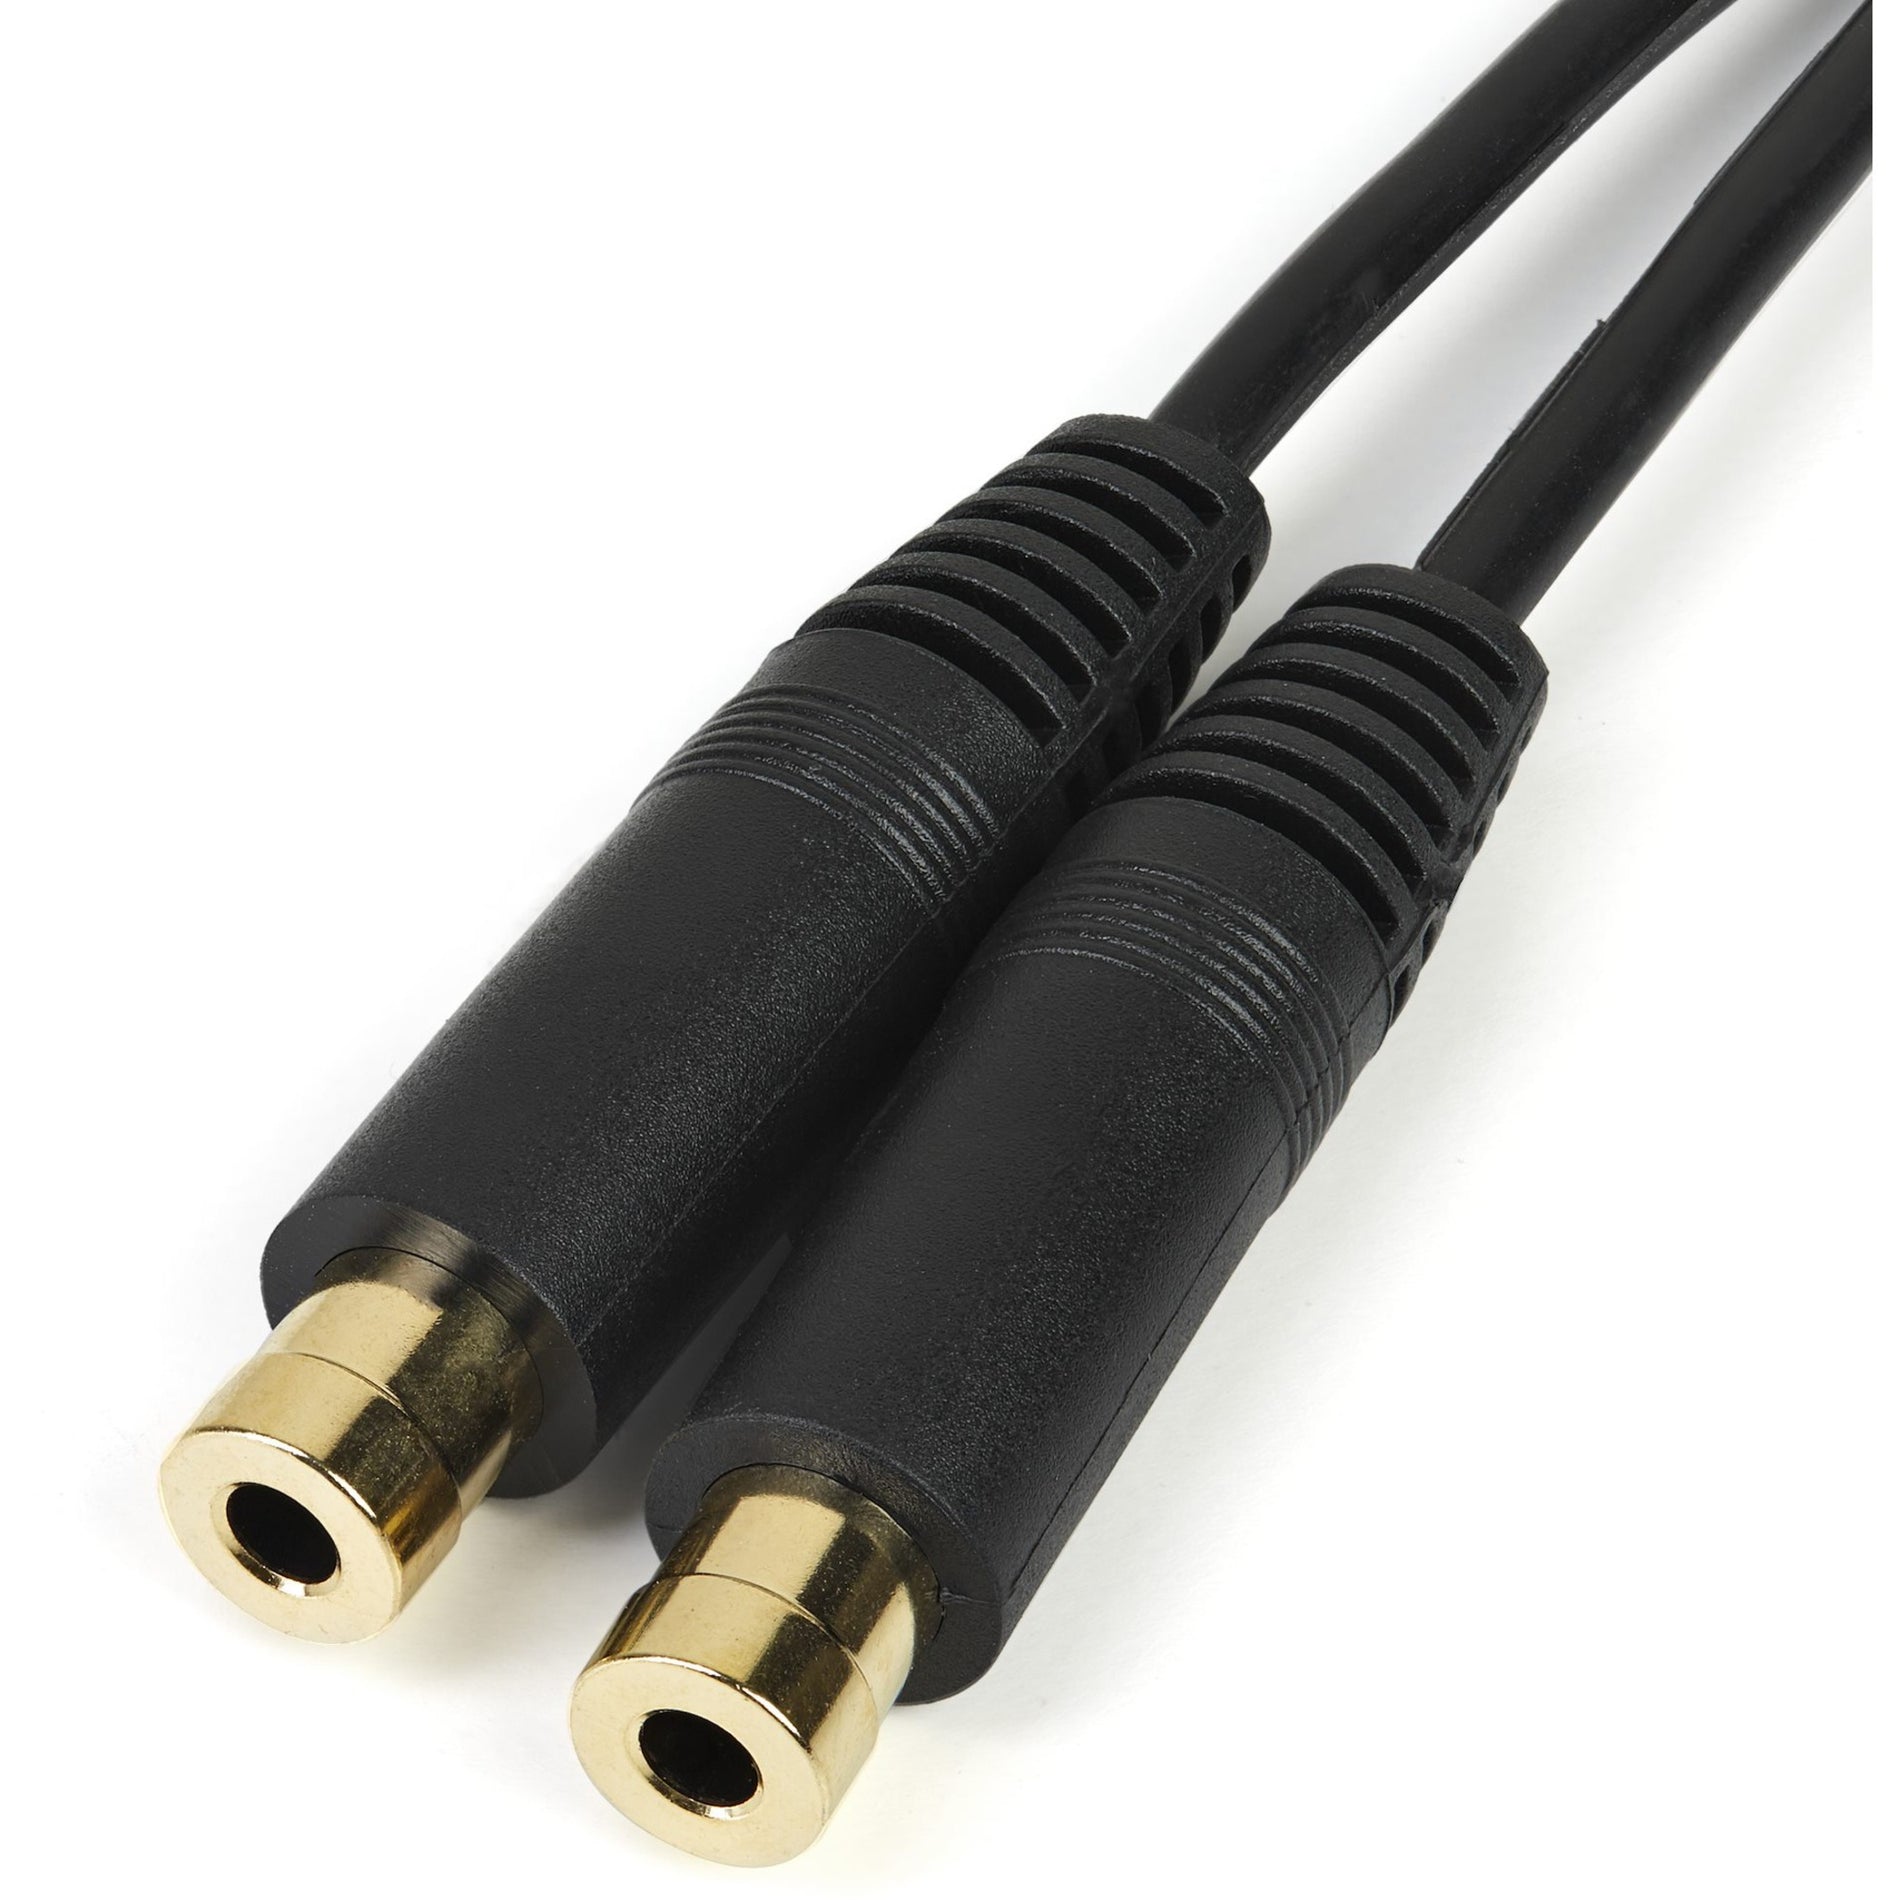 StarTech.com MUY1MFF Stereo Splitter Cable - Phono Stereo 3.5mm (M) - Phono 2x Stereo (F) - 6in, Corrosion-free, EMI/RF Protection